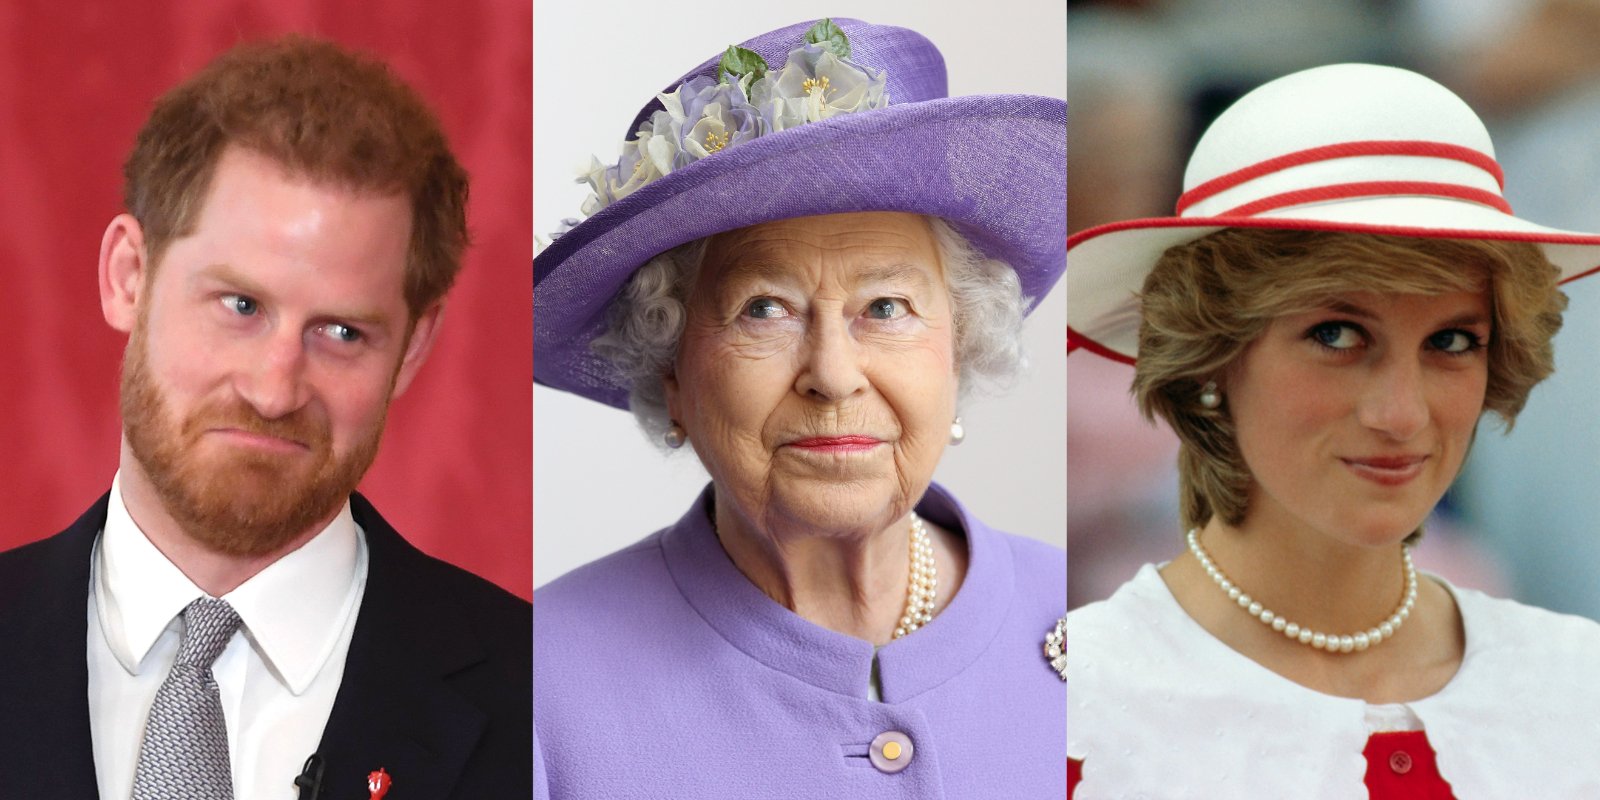 Queen Elizabeth II Wouldn’t Appear Rattled by  Prince Harry’s ‘Spare’ Just As She Didn’t When Princess Diana Spilled Secrets to Press, Says Royal Expert